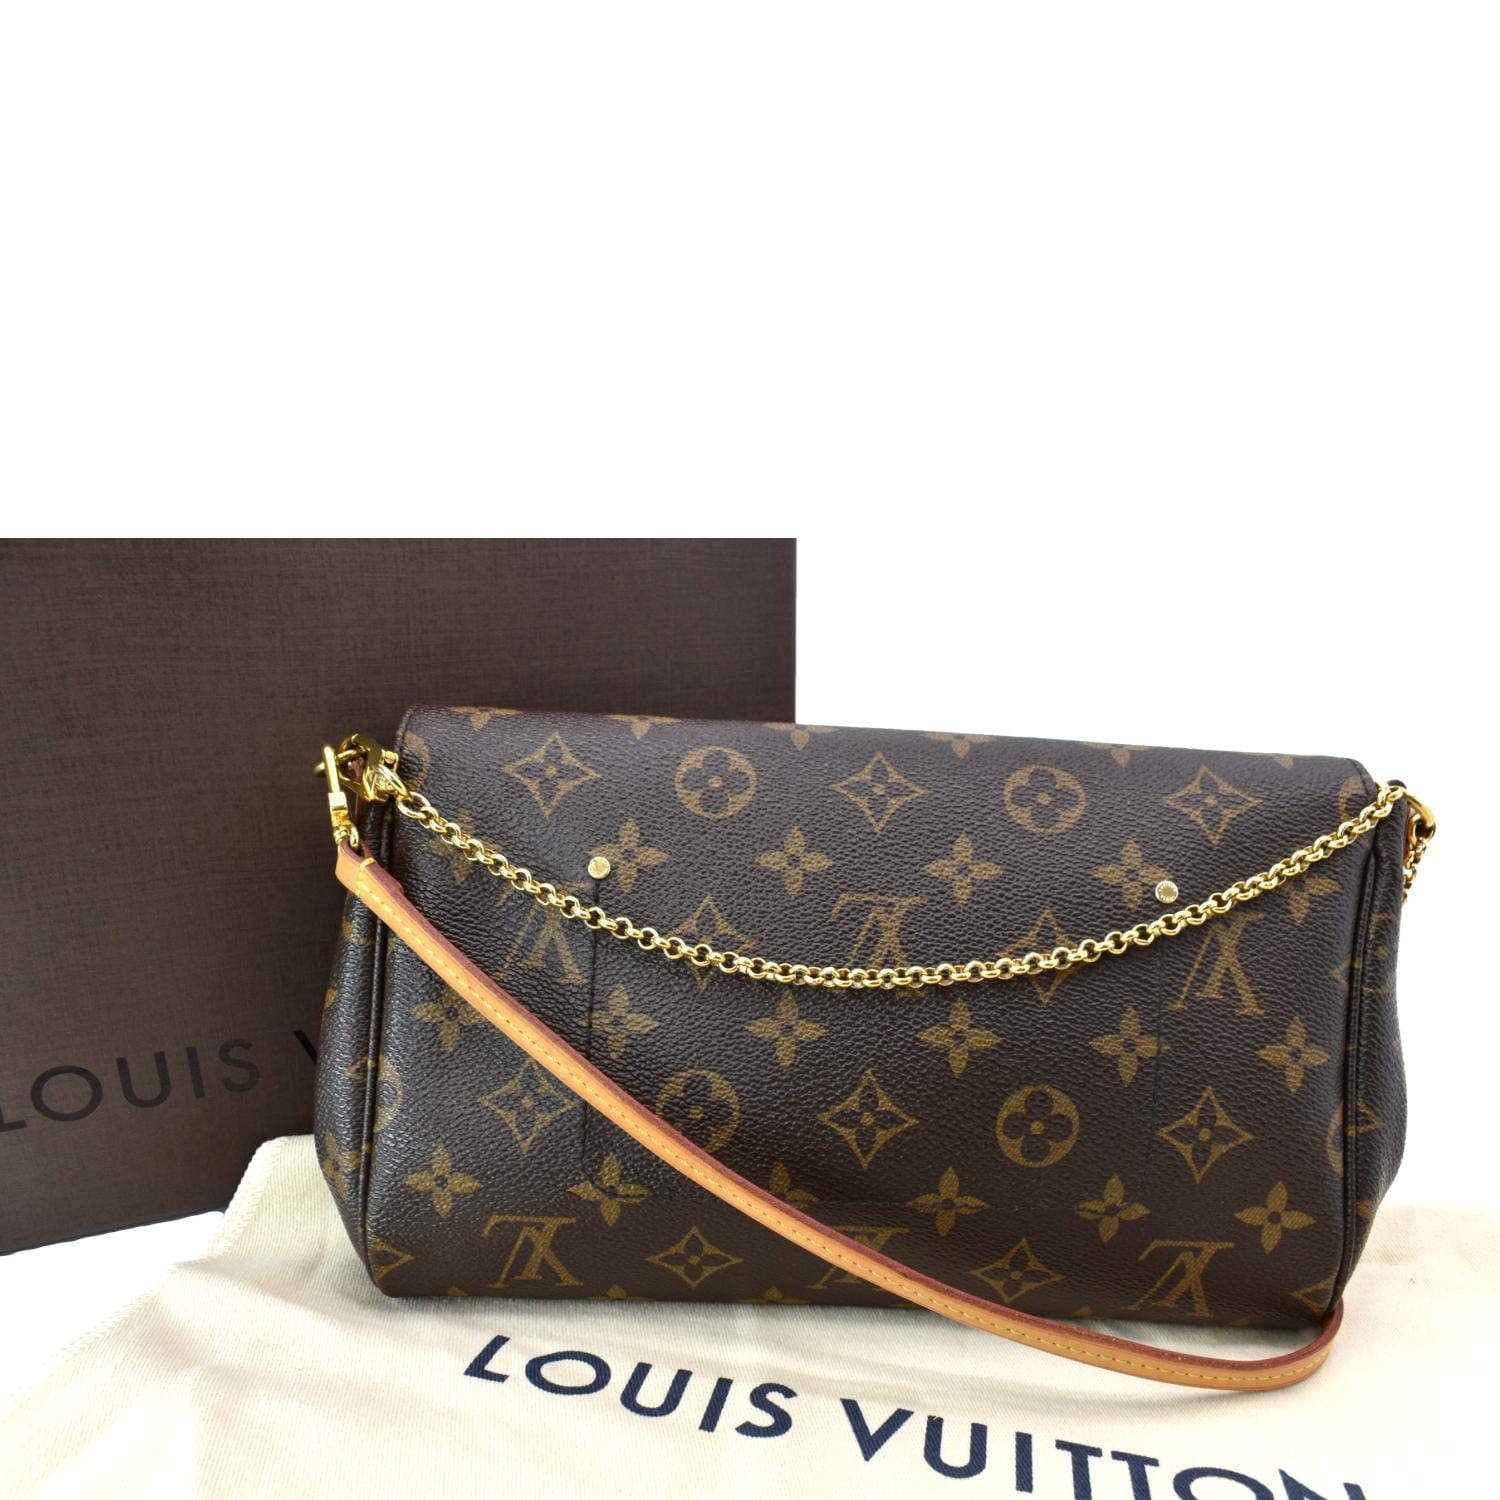 🤎LOUIS VUITTON BRUNETTE🤎 this brunette is like a well-worn, well-loved LV  bag, the color has an expensive but effortless vibe that pairs…